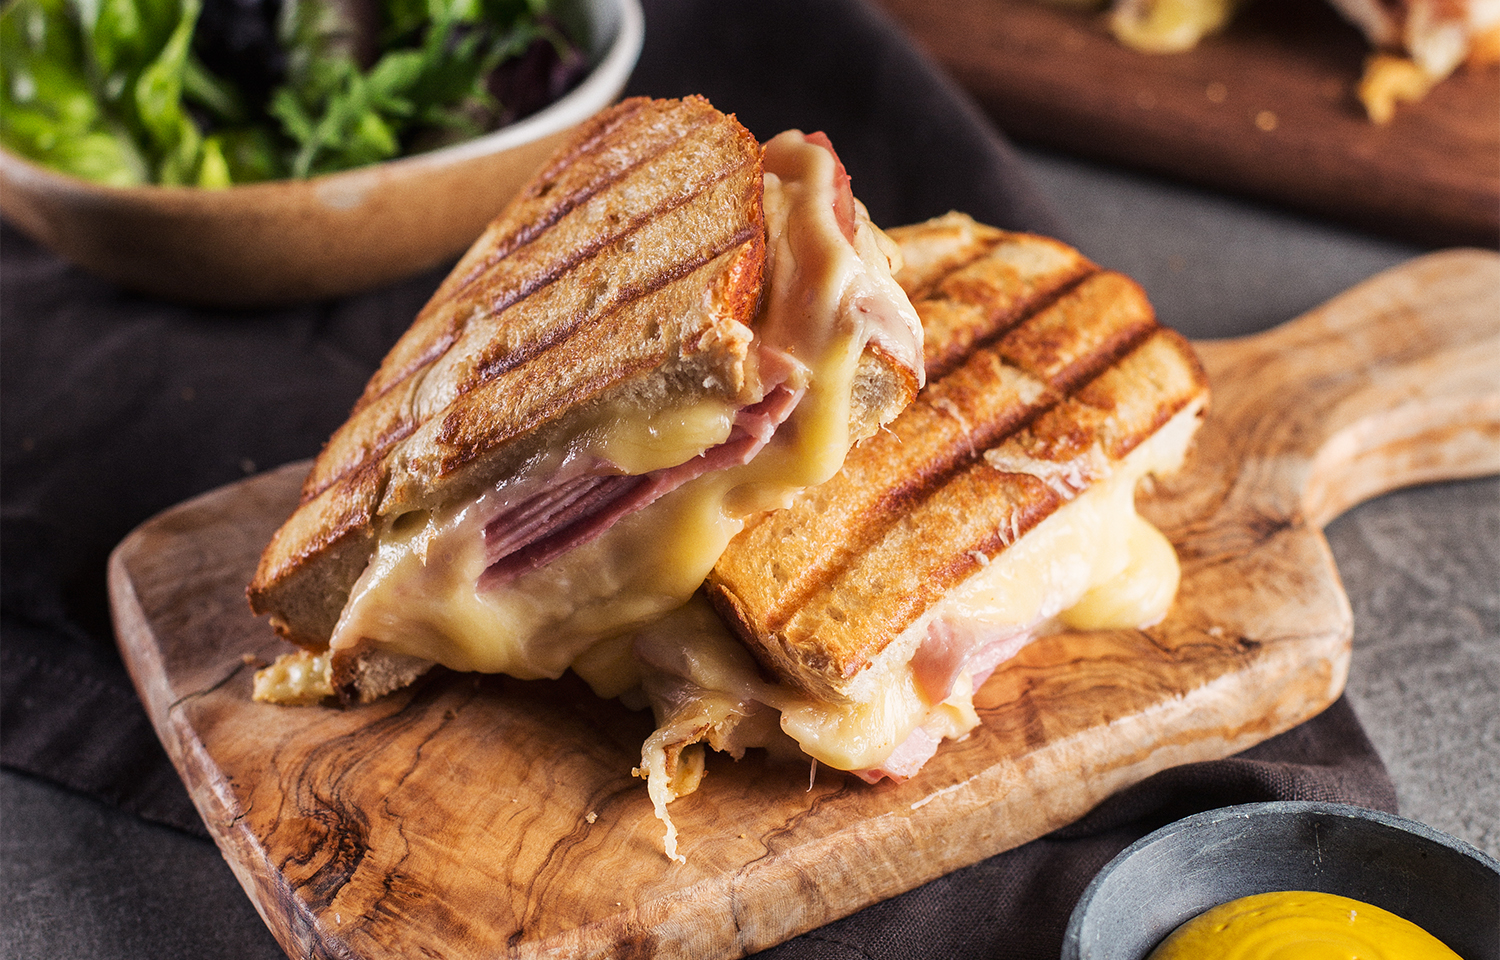 This 25-Question General Knowledge Quiz Will Determine If You Know a Little or a Lot Croque monsieur